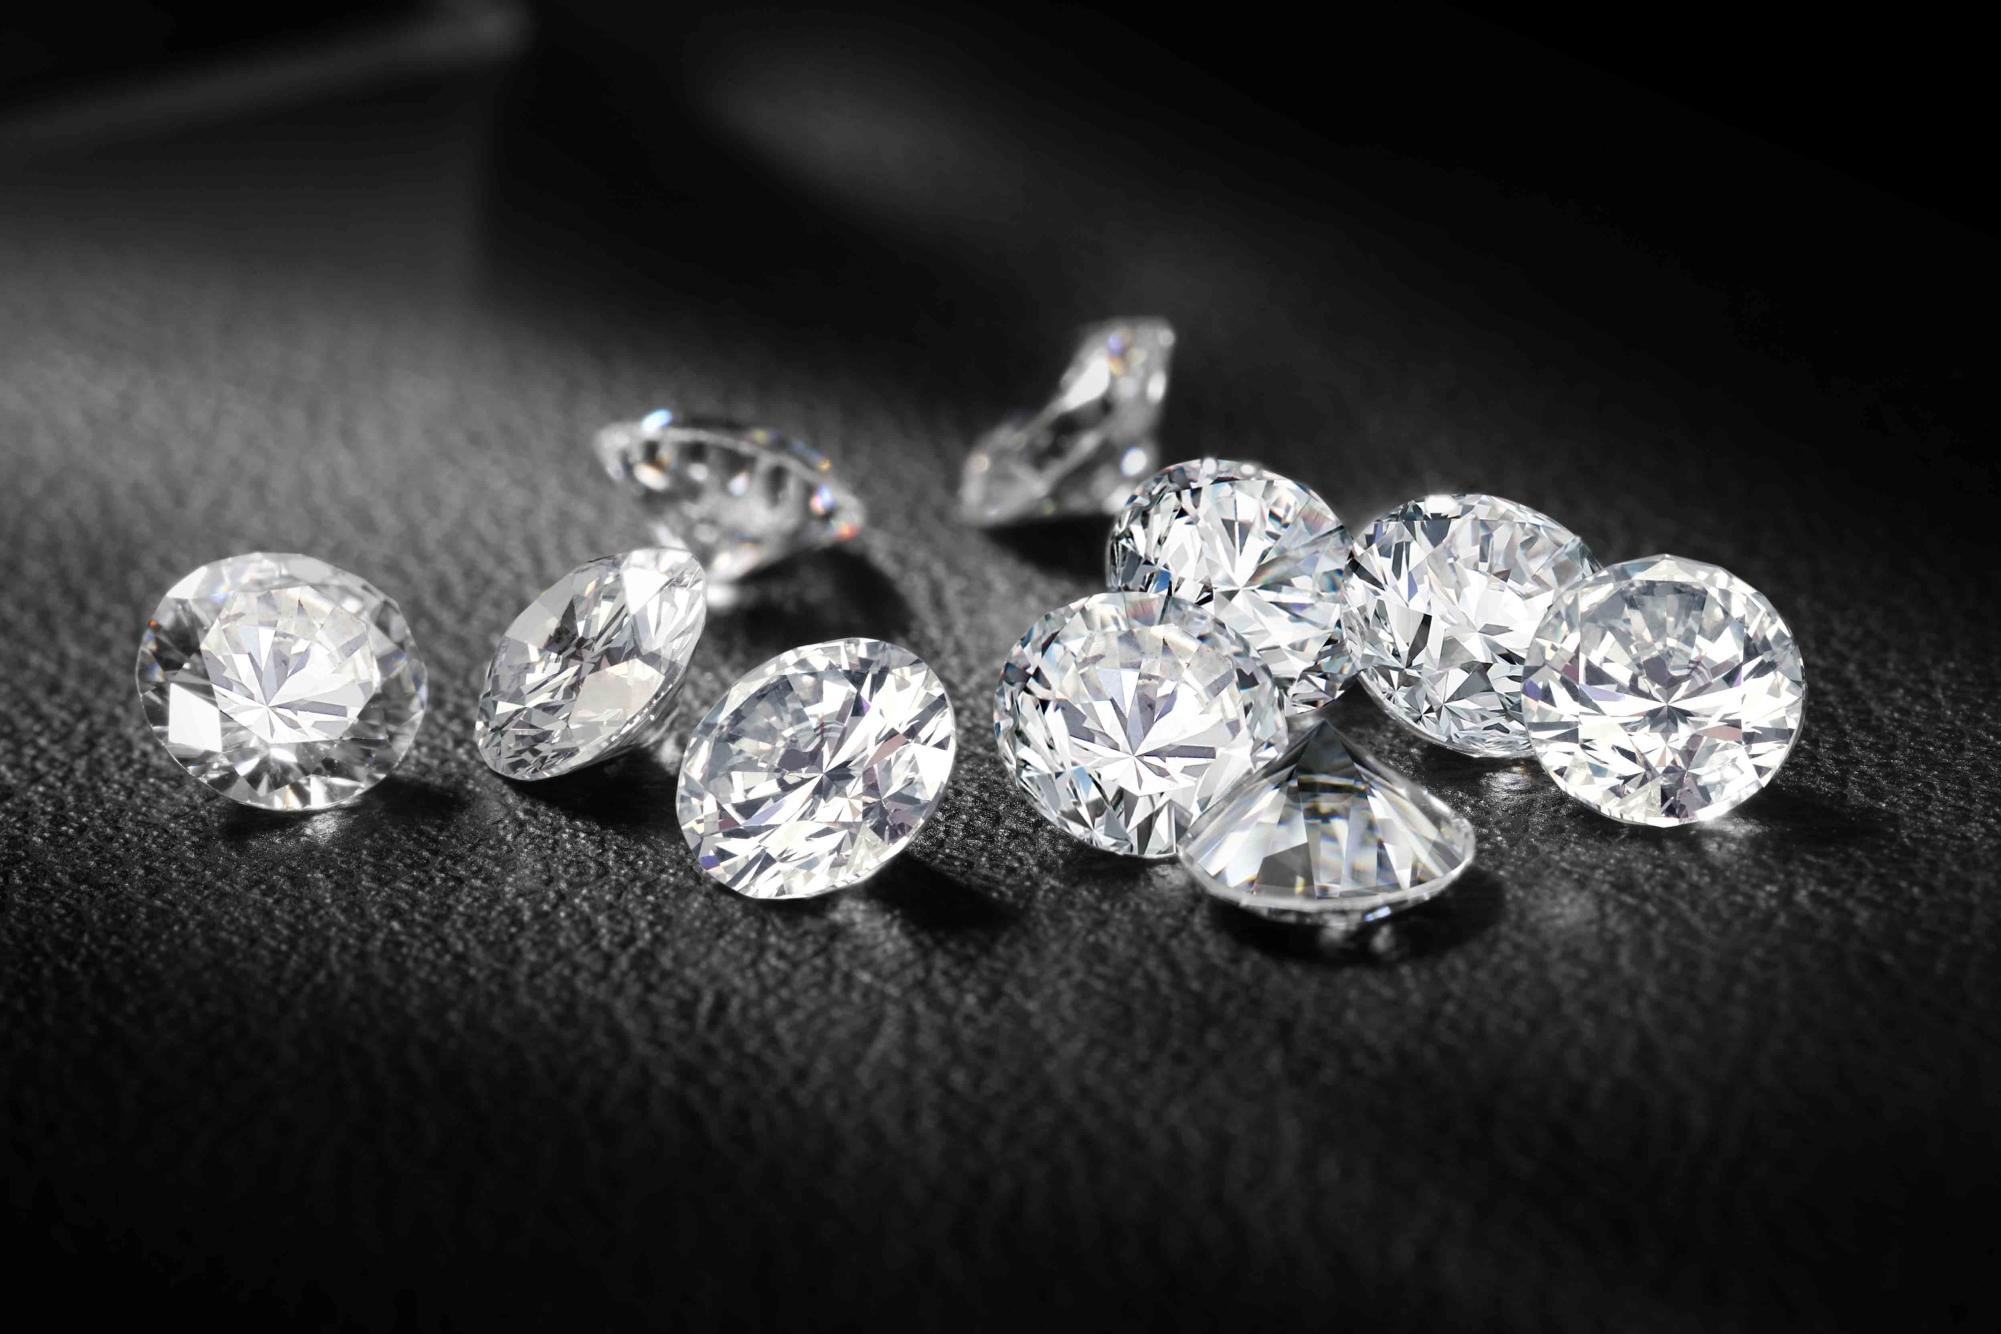 Diamonds: Do they really last ‘forever’?